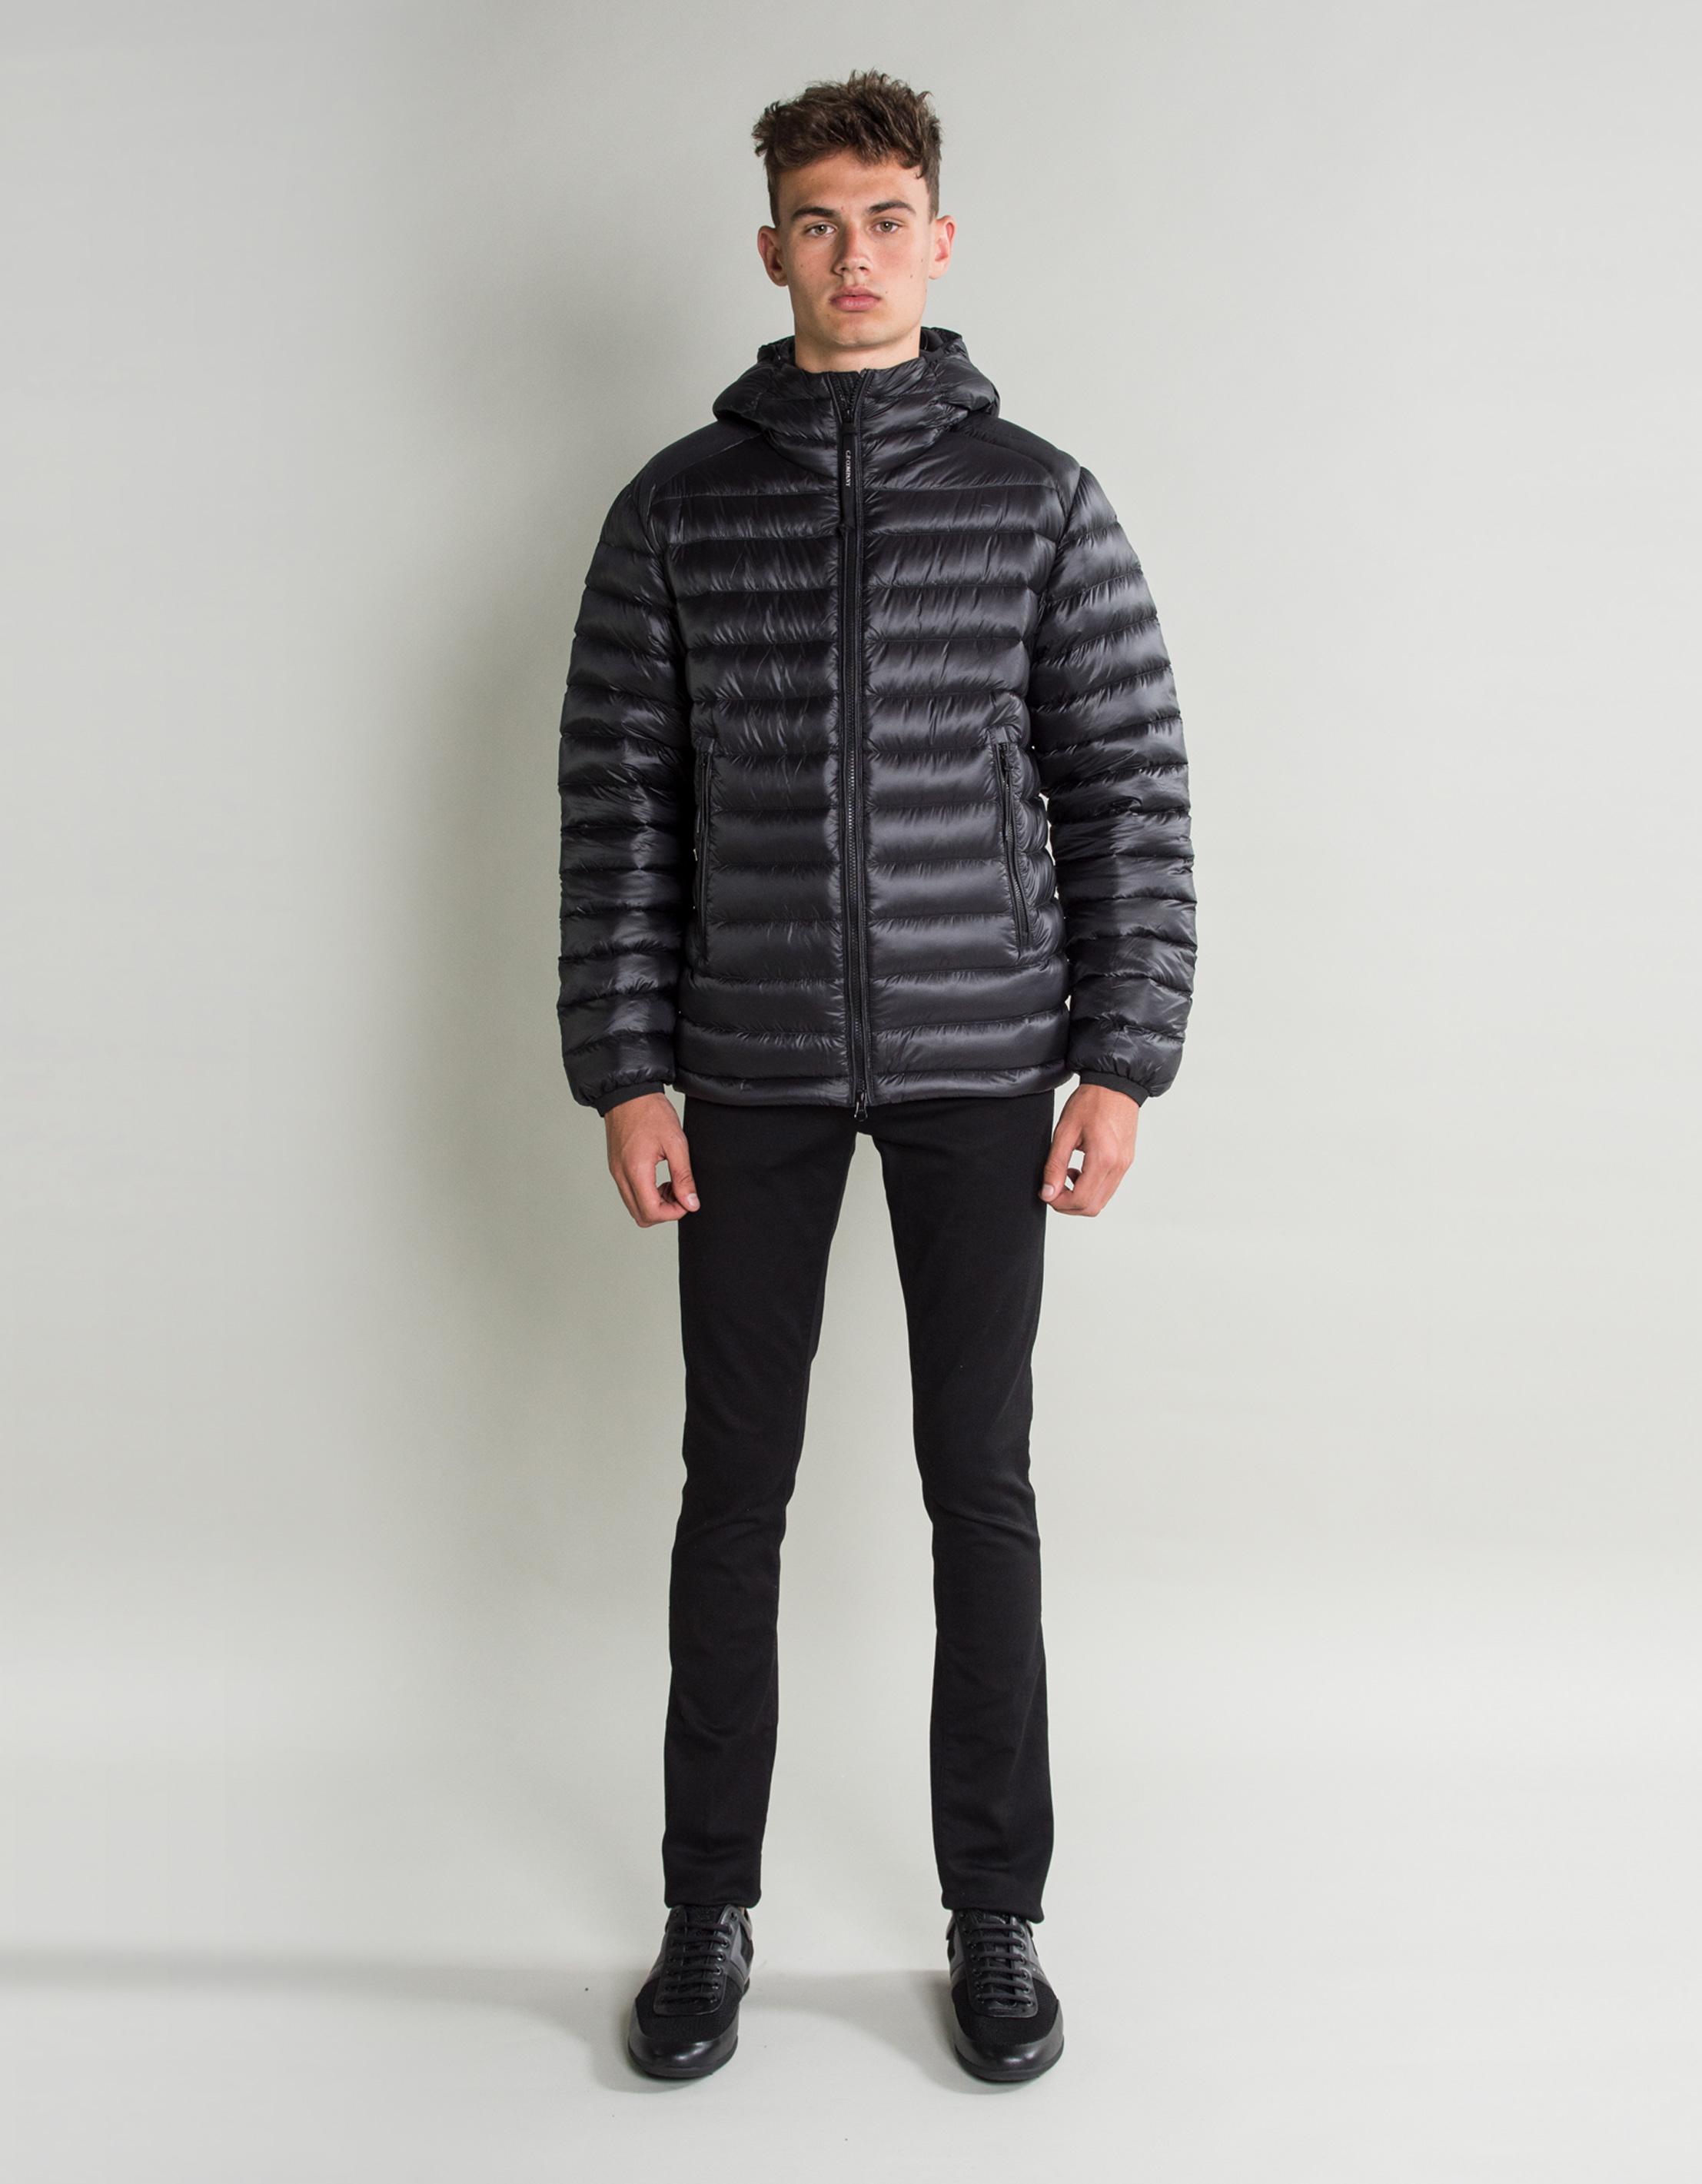 Cp Company Hooded Down Jacket Clearance, SAVE 45% - raptorunderlayment.com